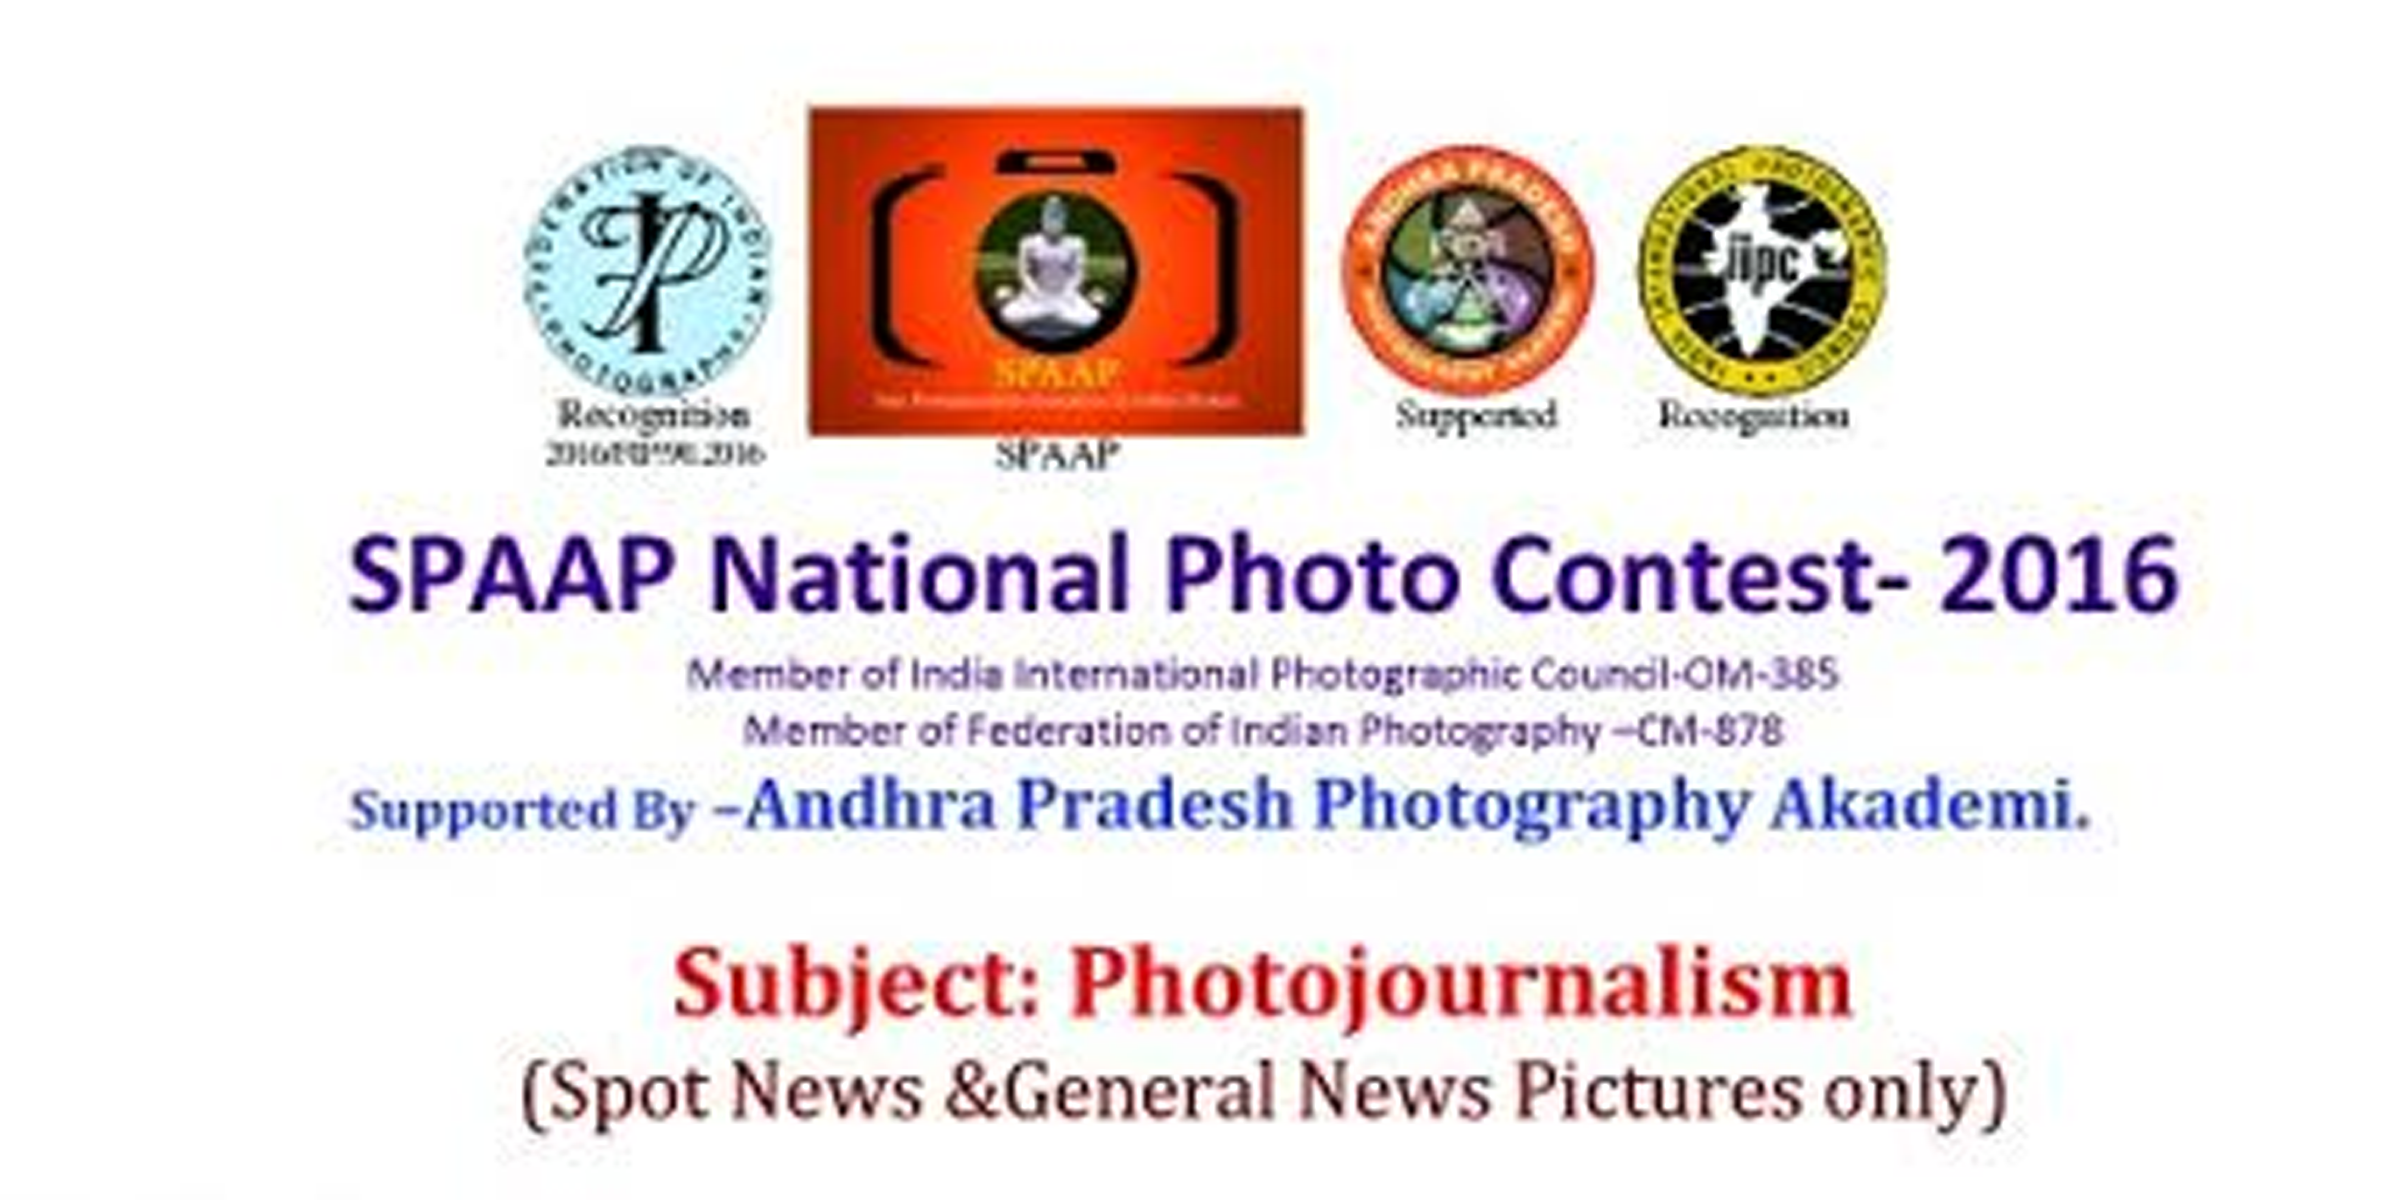 SAAP National Photo contest 2016 : Last date to send entries : 20th of October 2016.